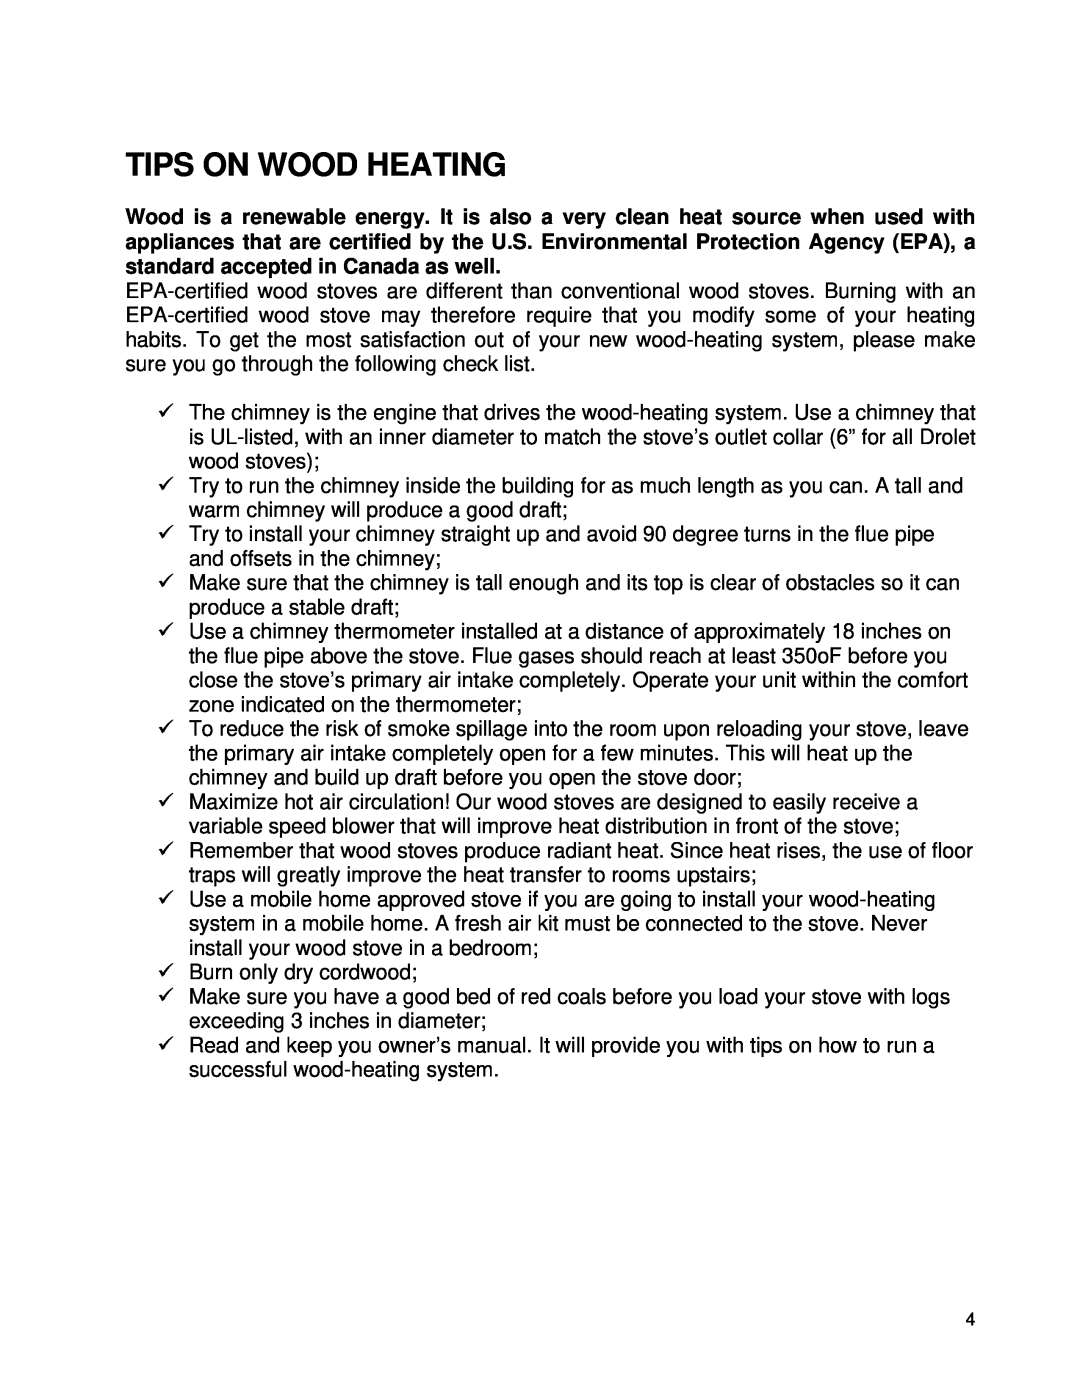 Drolet WOODSTOVES owner manual Tips On Wood Heating 